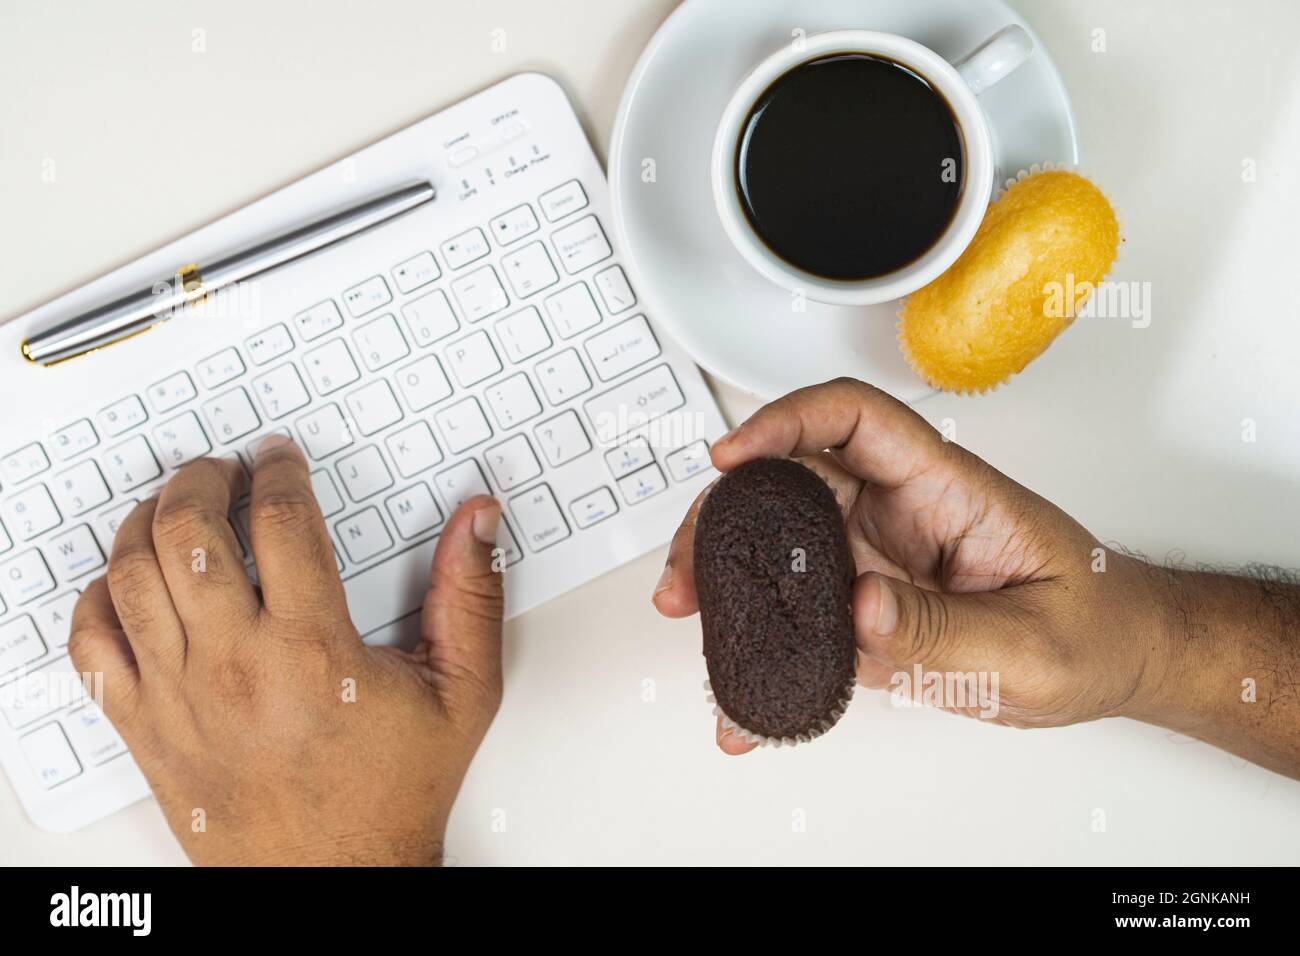 Working from home concept. Typing on a keyboard and eating muffins with a cup of coffee. Selective focus points Stock Photo